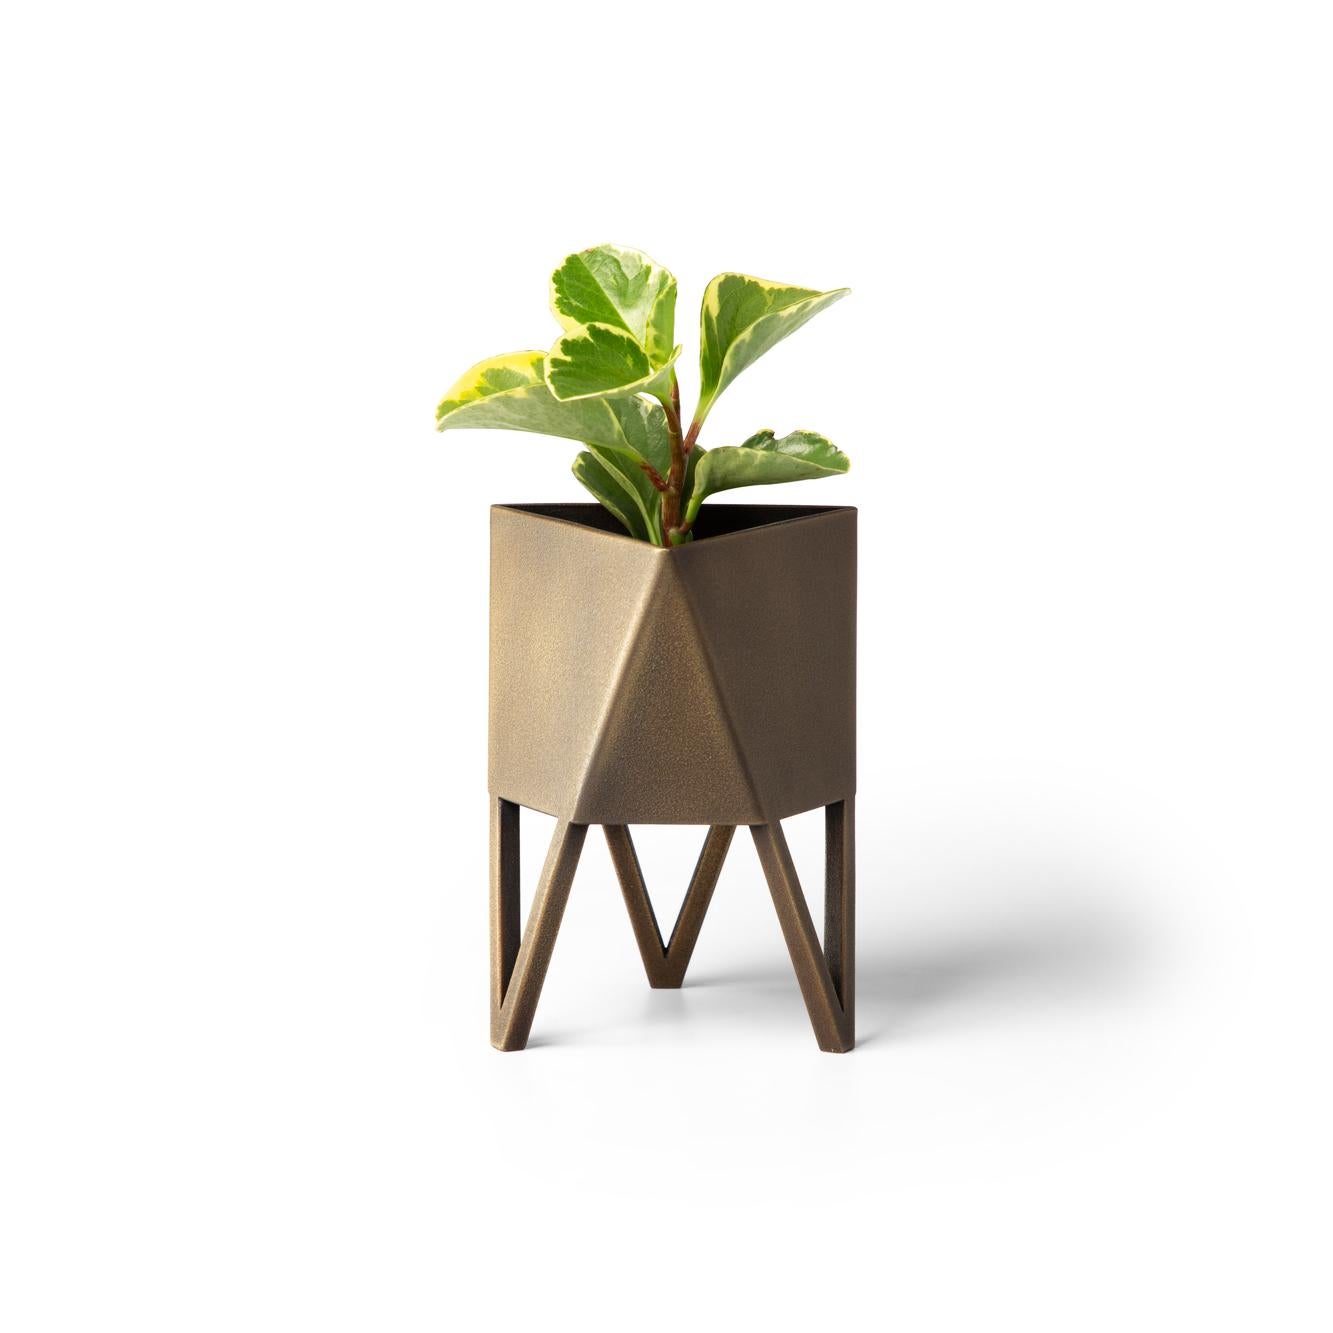 Deca Planter in Mars By Force/Collide, Size Mini, 2023 For Sale 9